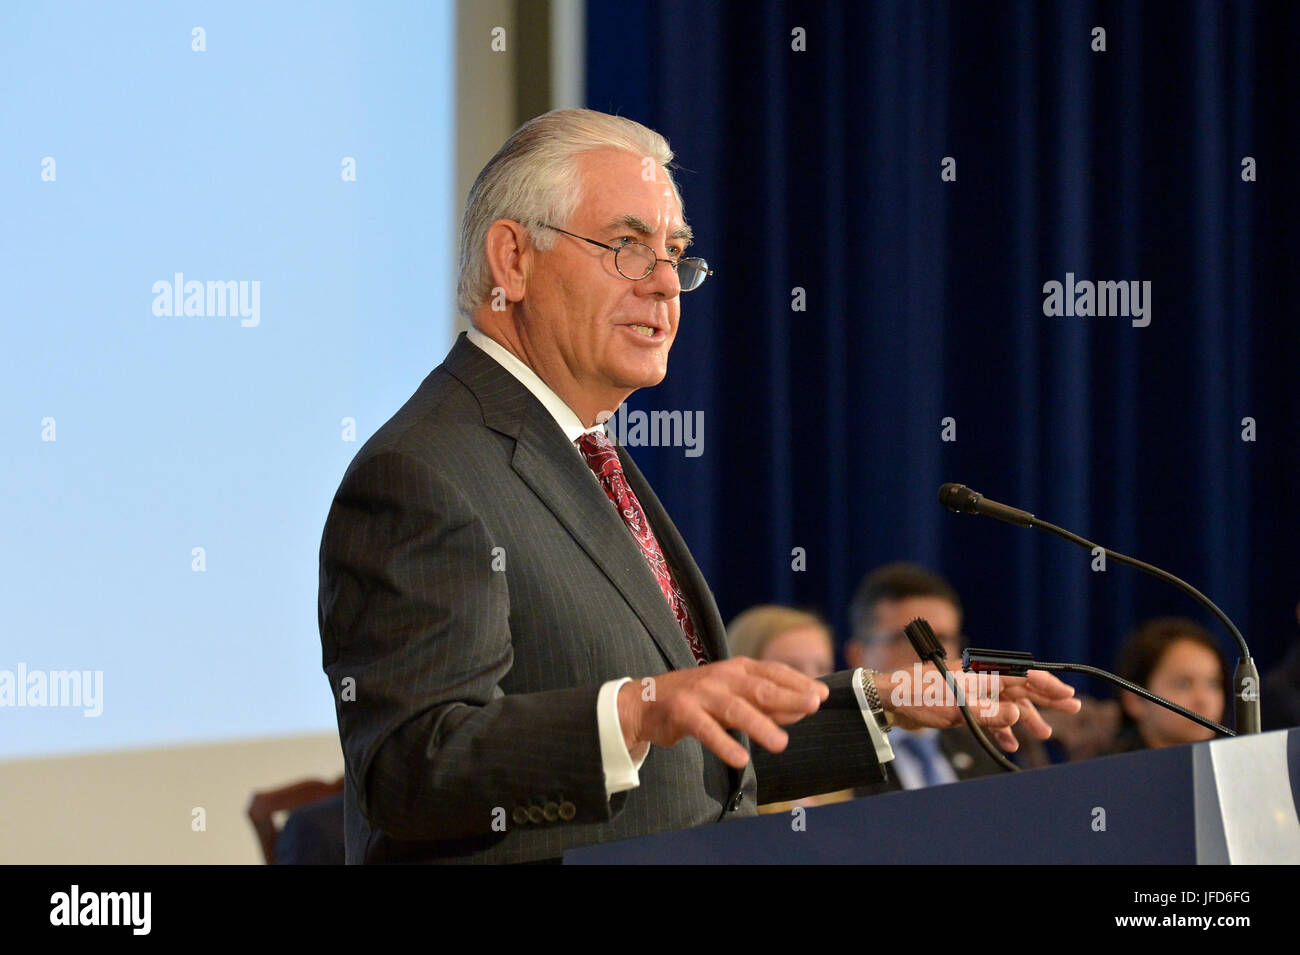 U.S. Secretary of State Rex Tillerson delivers remarks at the Model United Nations Conference at the U.S. Department of State in Washington, D.C., on May 2, 2017. Stock Photo